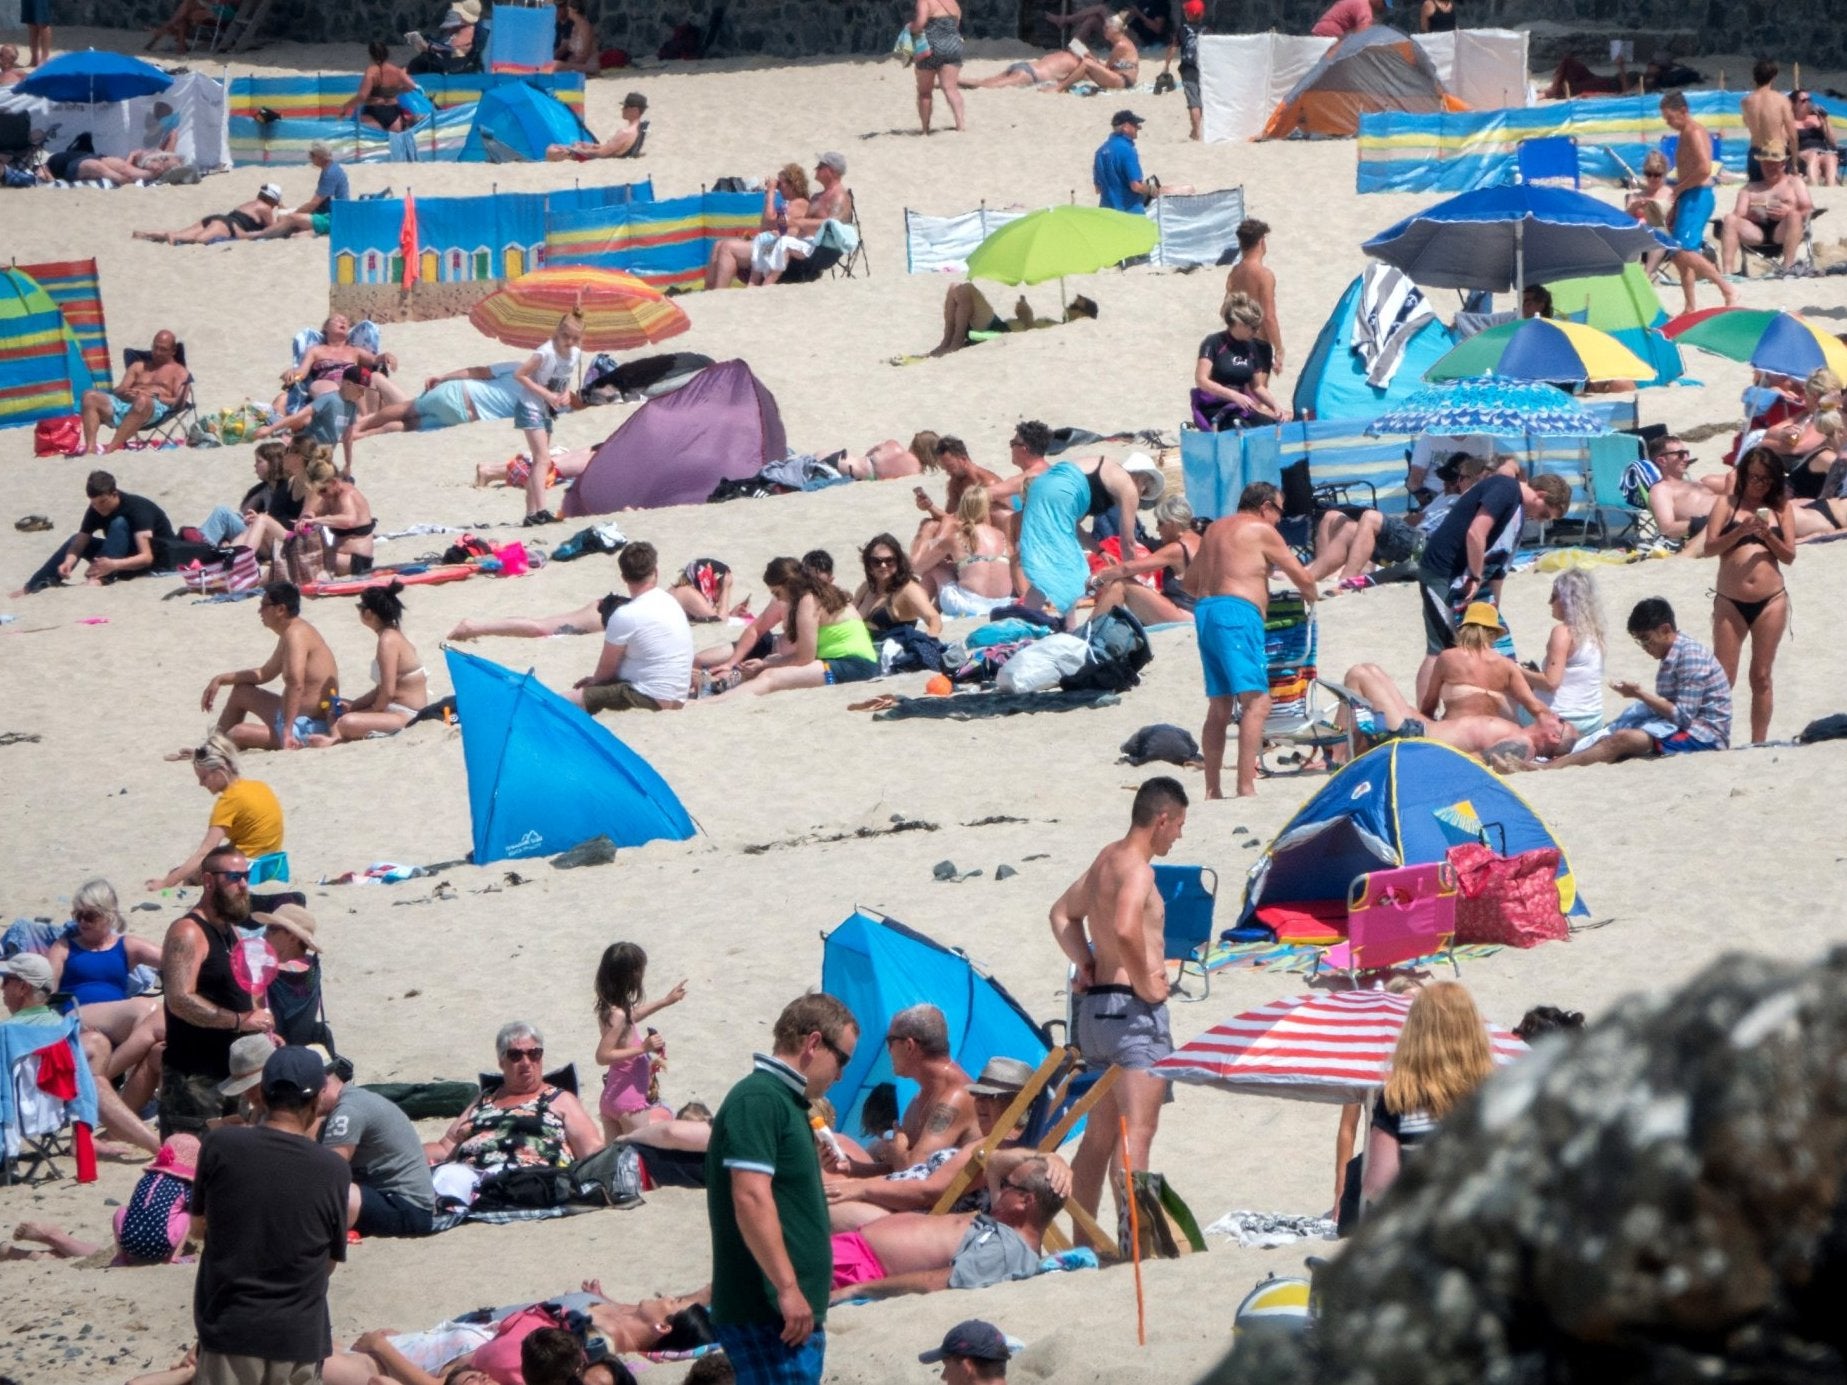 Temperatures up to 29C have been recorded across England and Wales this week